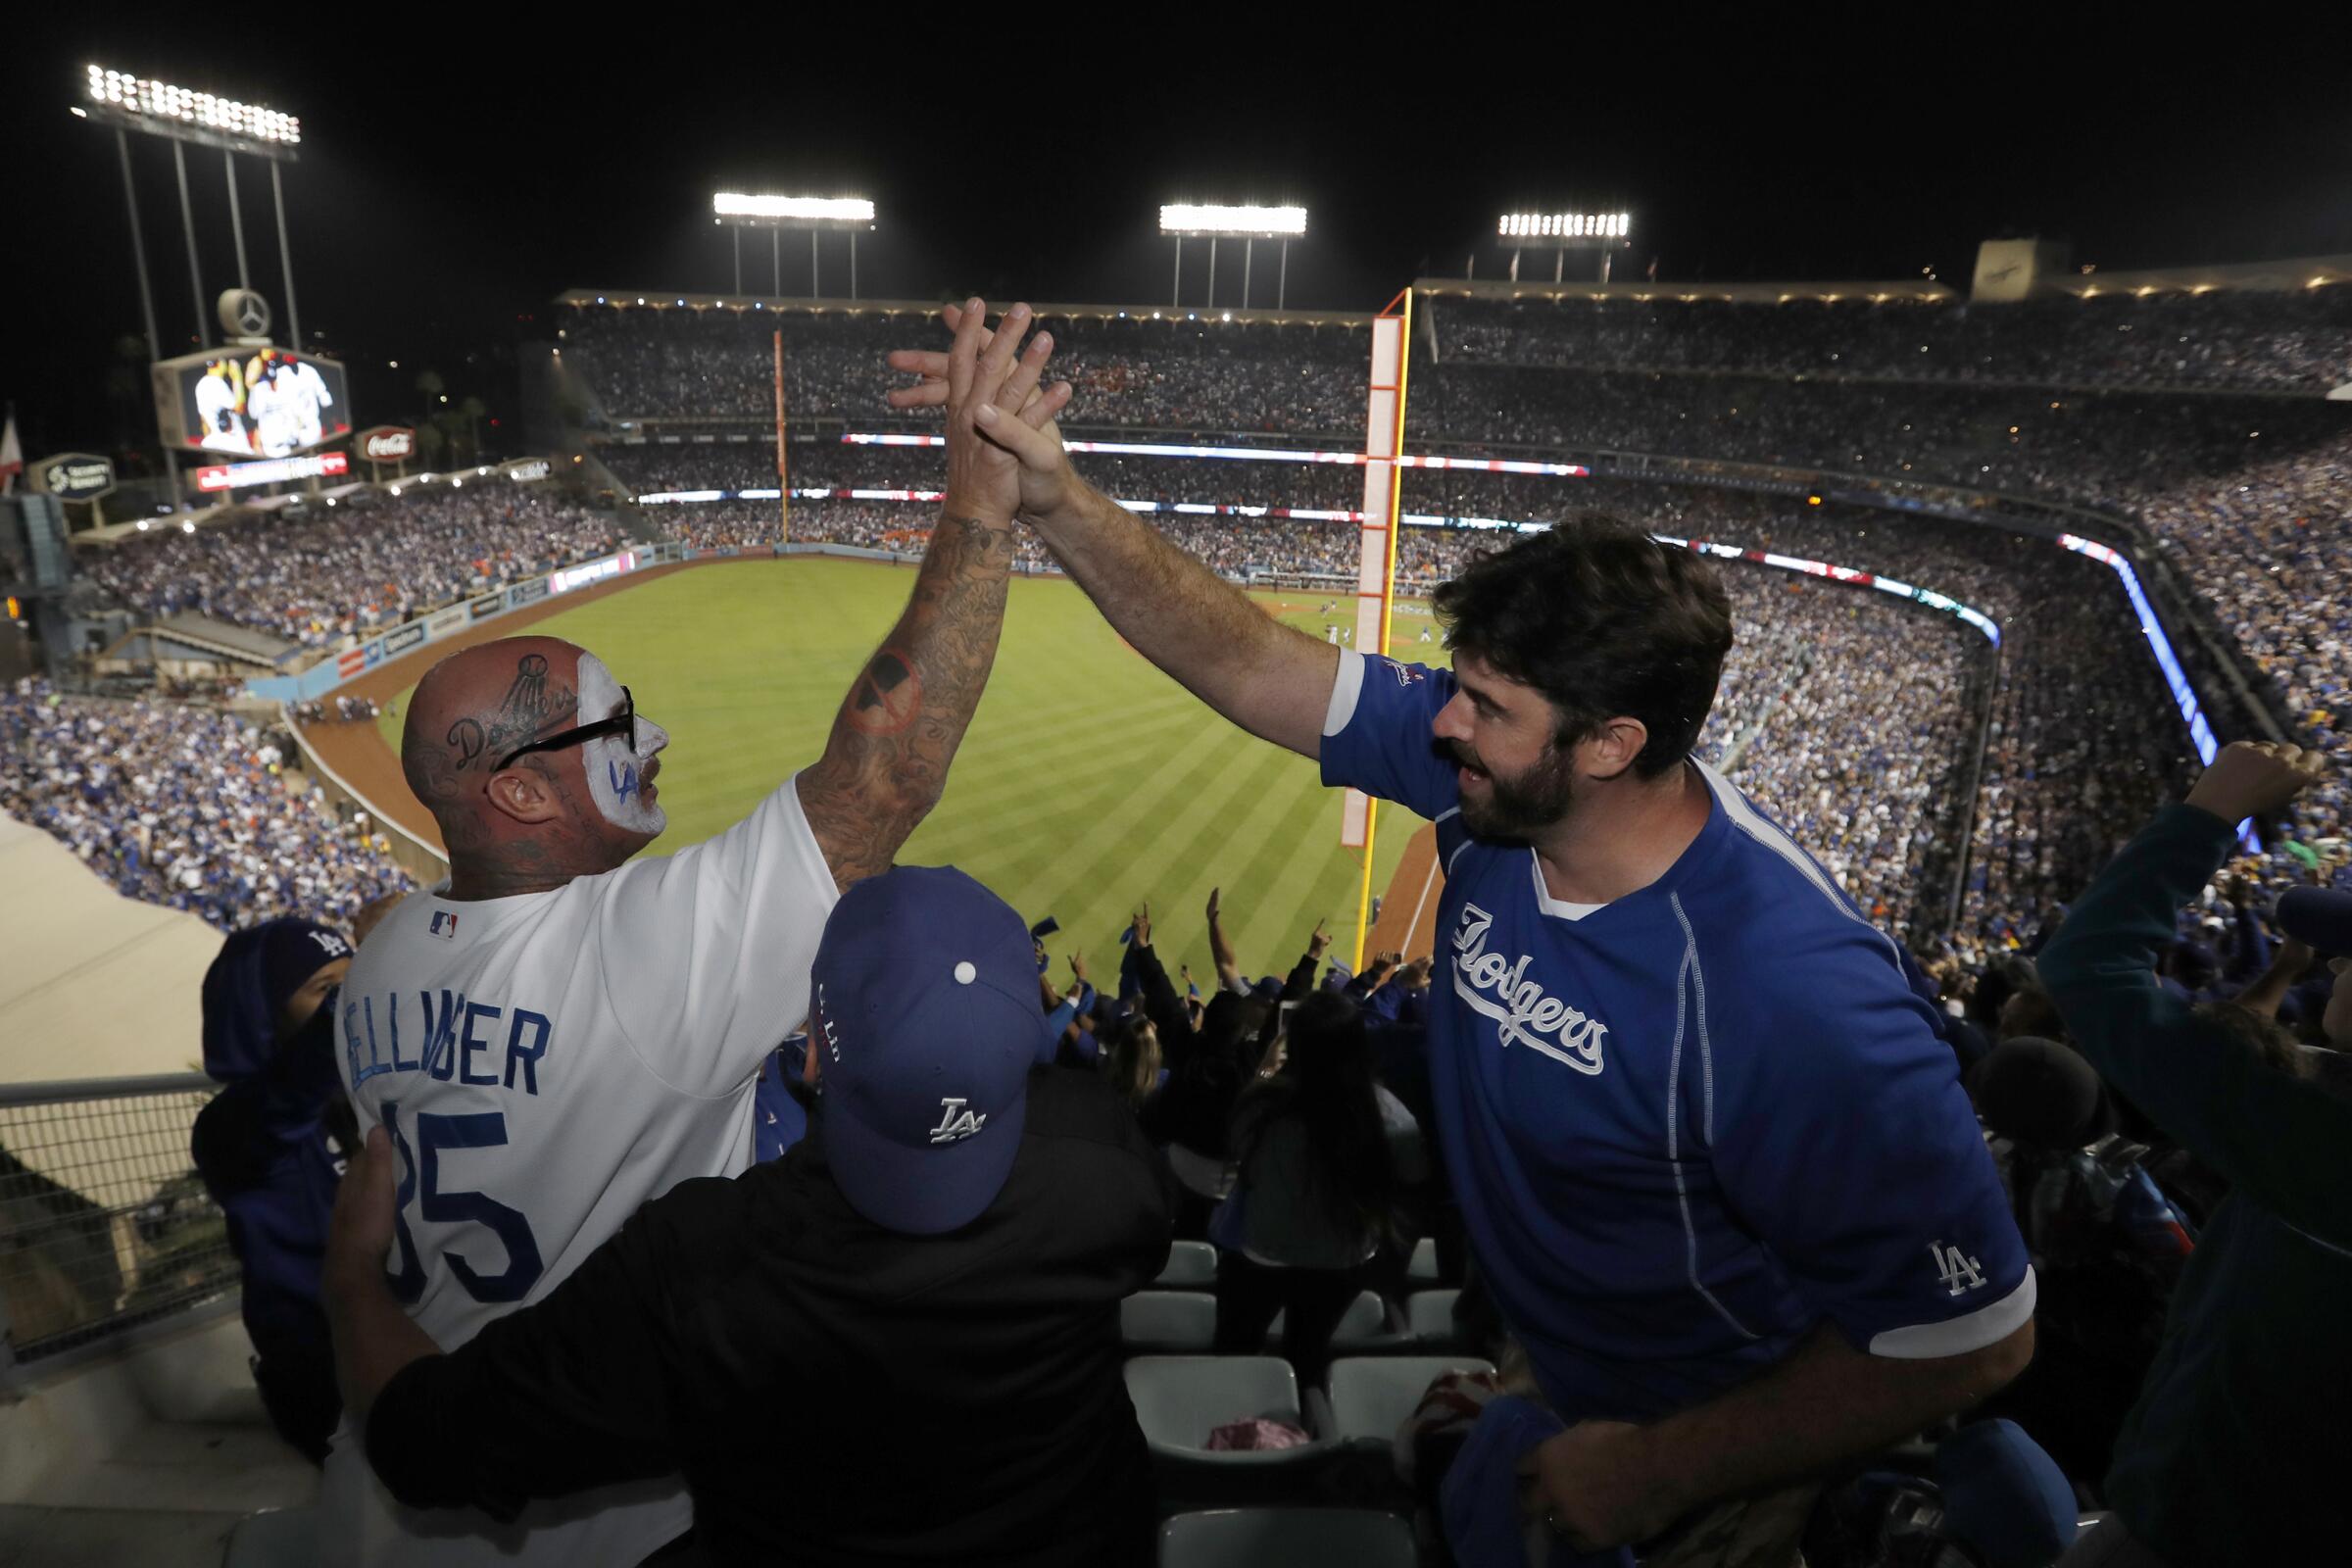 Two fans in Dodgers jerseys, one with Dodgers face paint, high five as fans at Dodger Stadium celebrate after a win